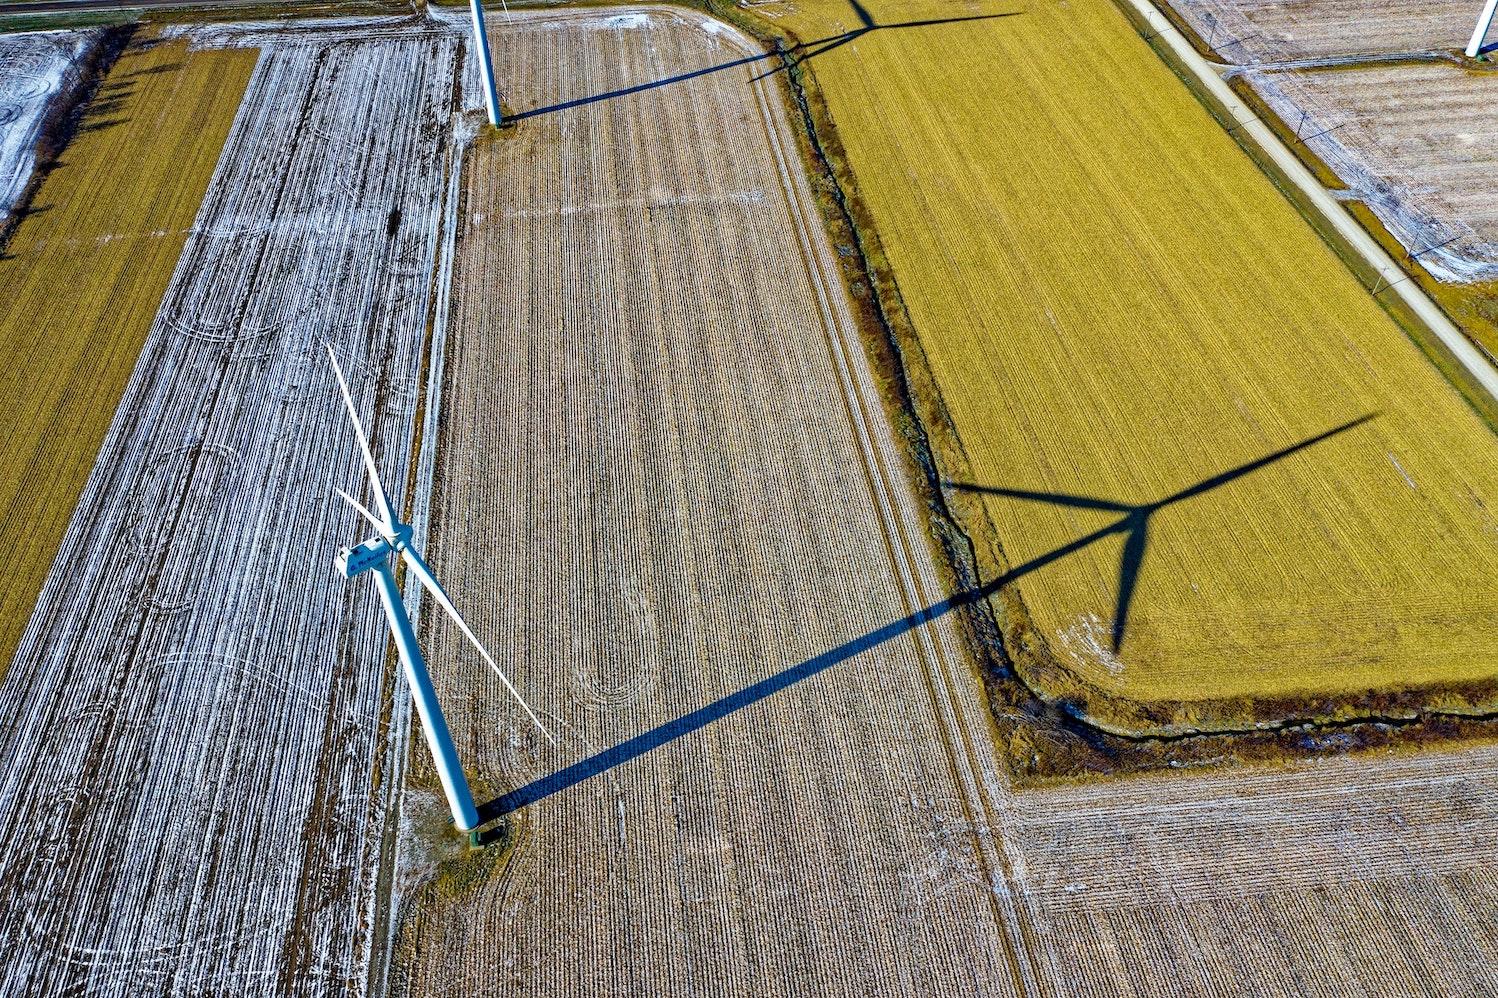 Aerial view of farms with wind turbines and a country road - engaging with suppliers on Scope 3